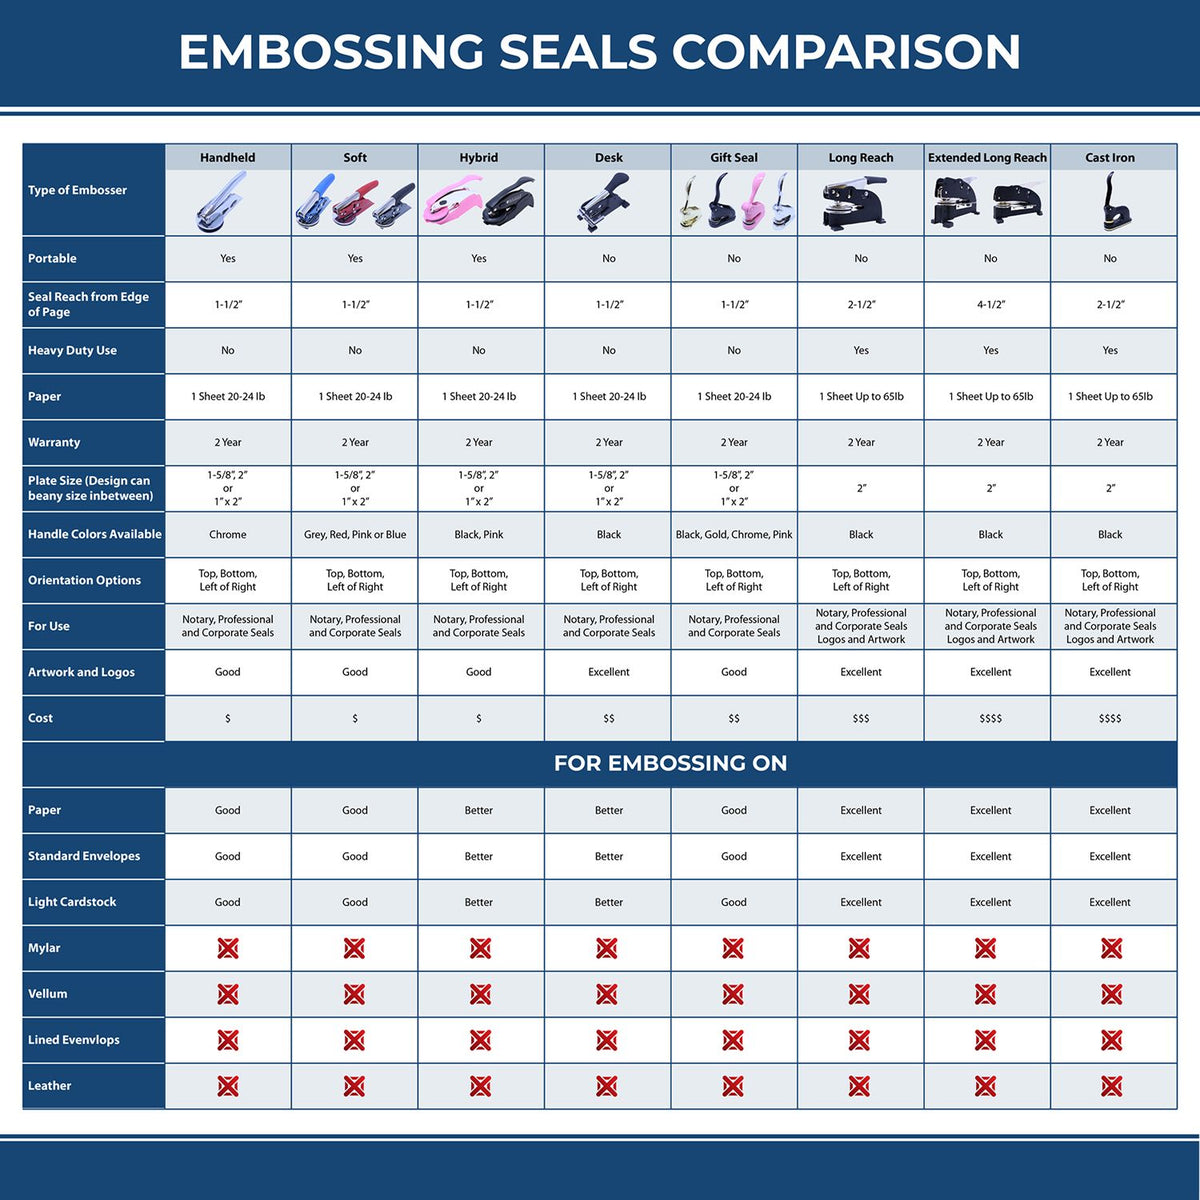 A comparison chart for the different types of mount models available for the Handheld Mississippi Architect Seal Embosser.